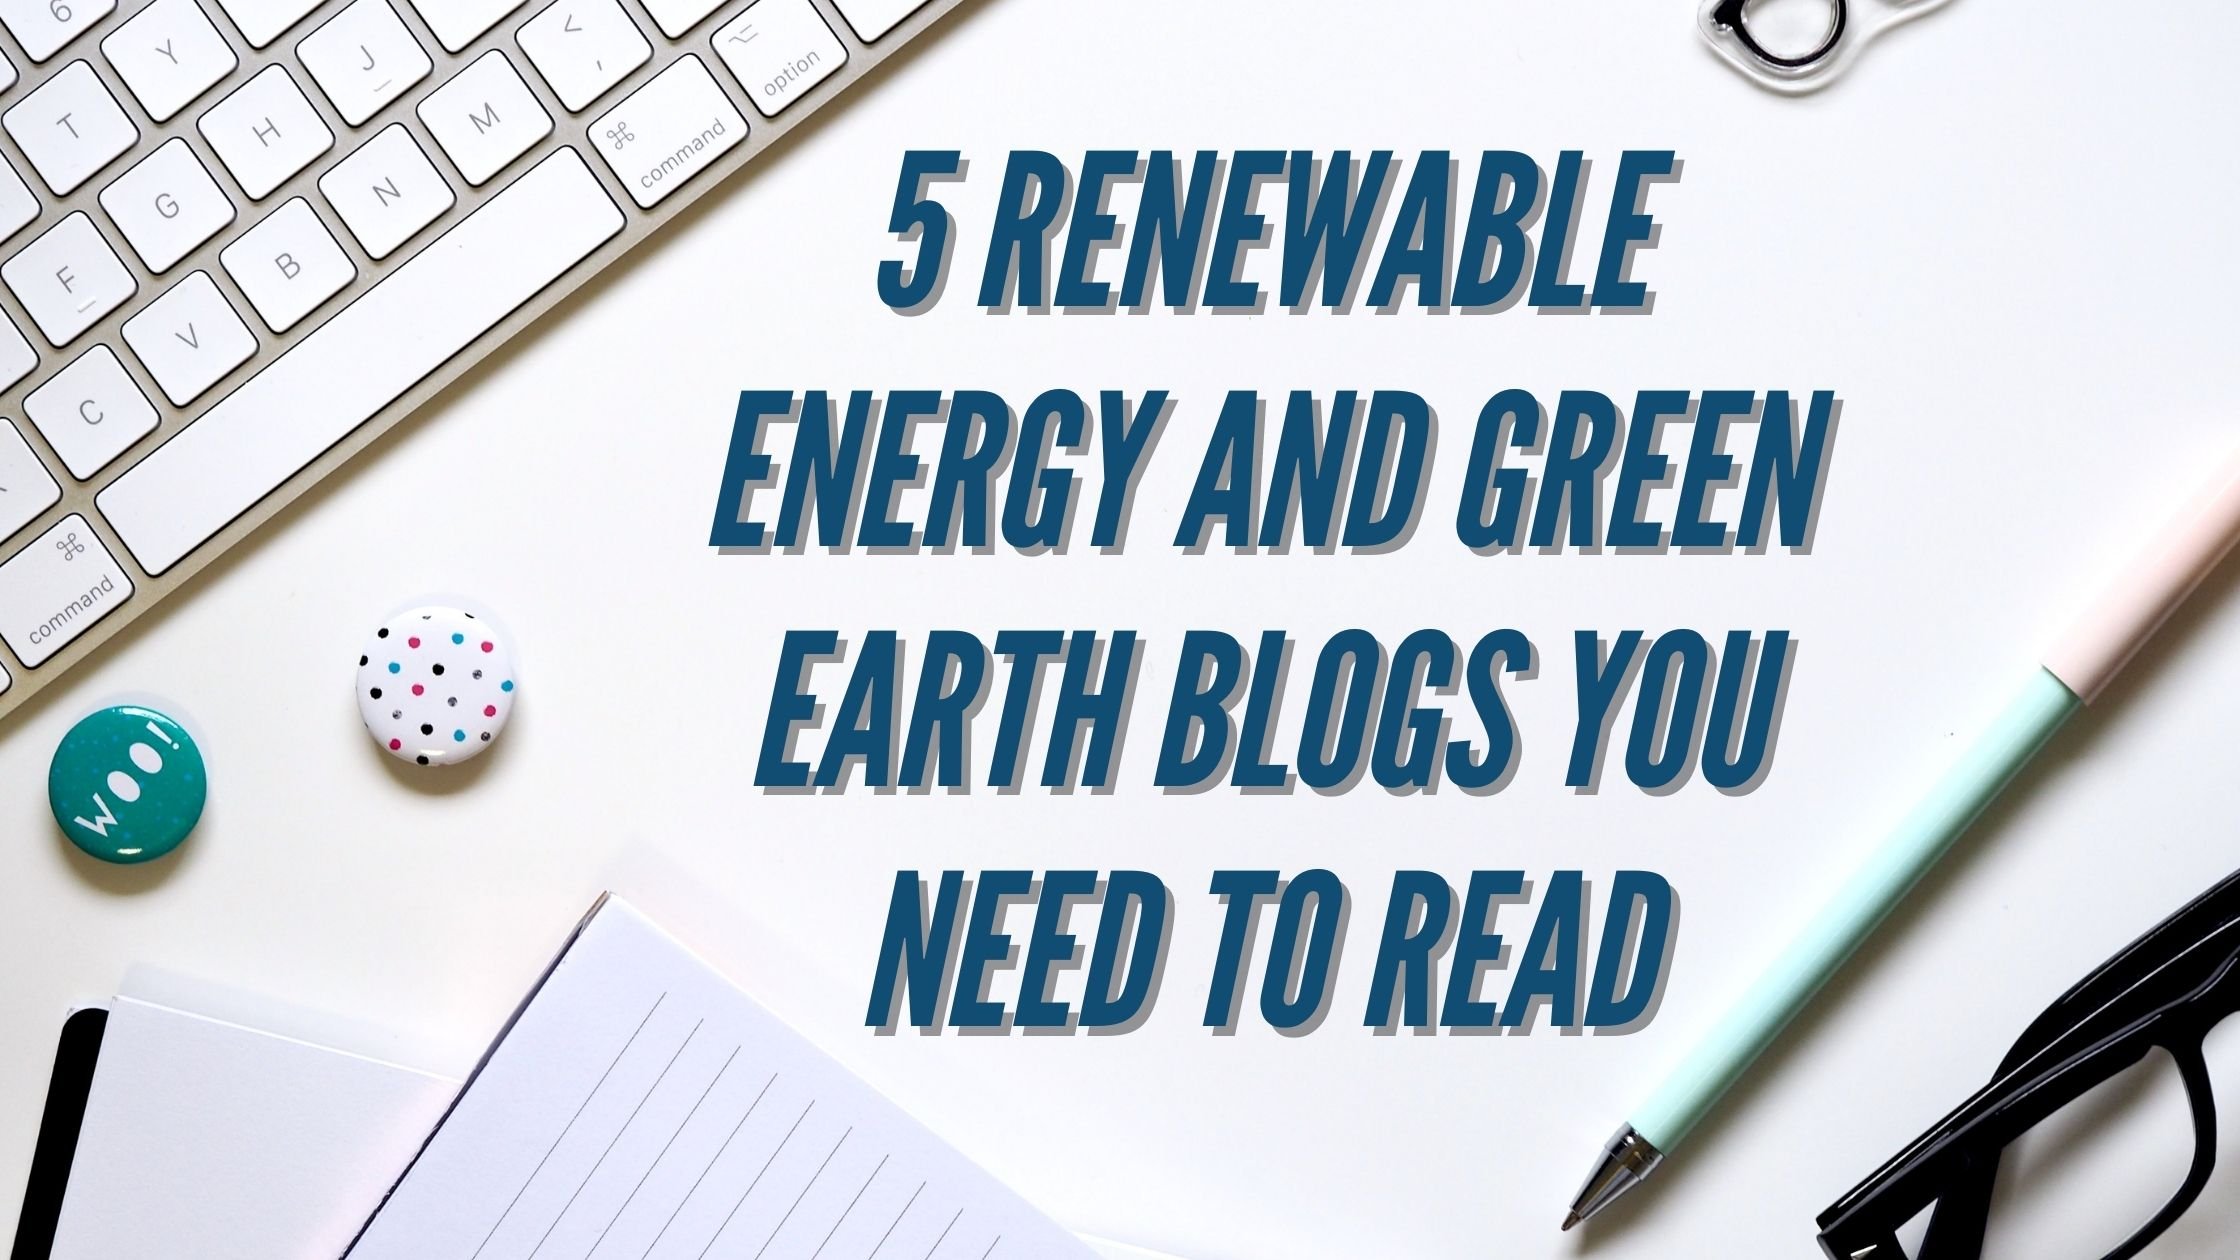 5 Renewable Energy and Green Earth Blogs You Need To Read